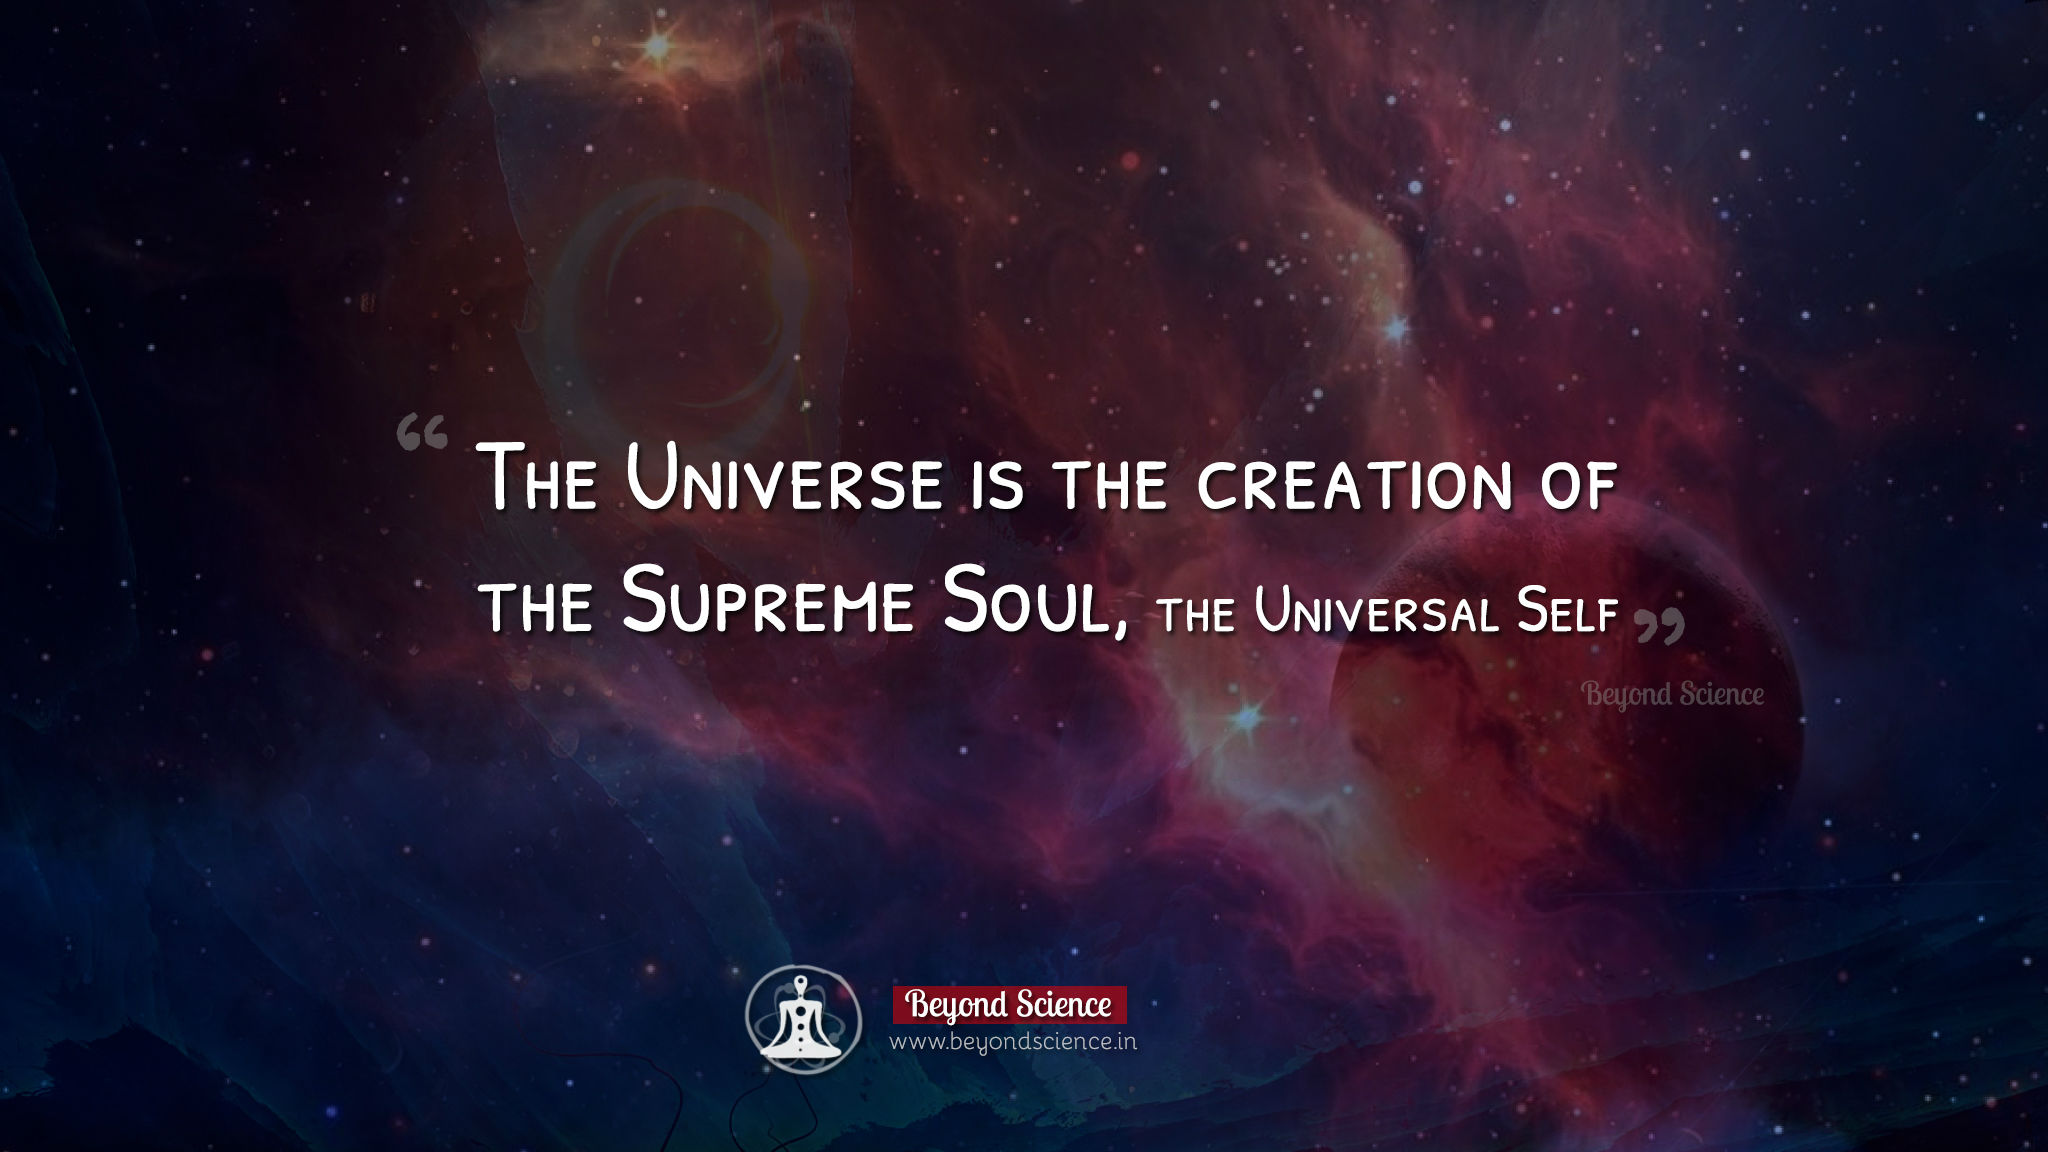 The Universe is the creation of the Supreme Soul, the Universal Self.